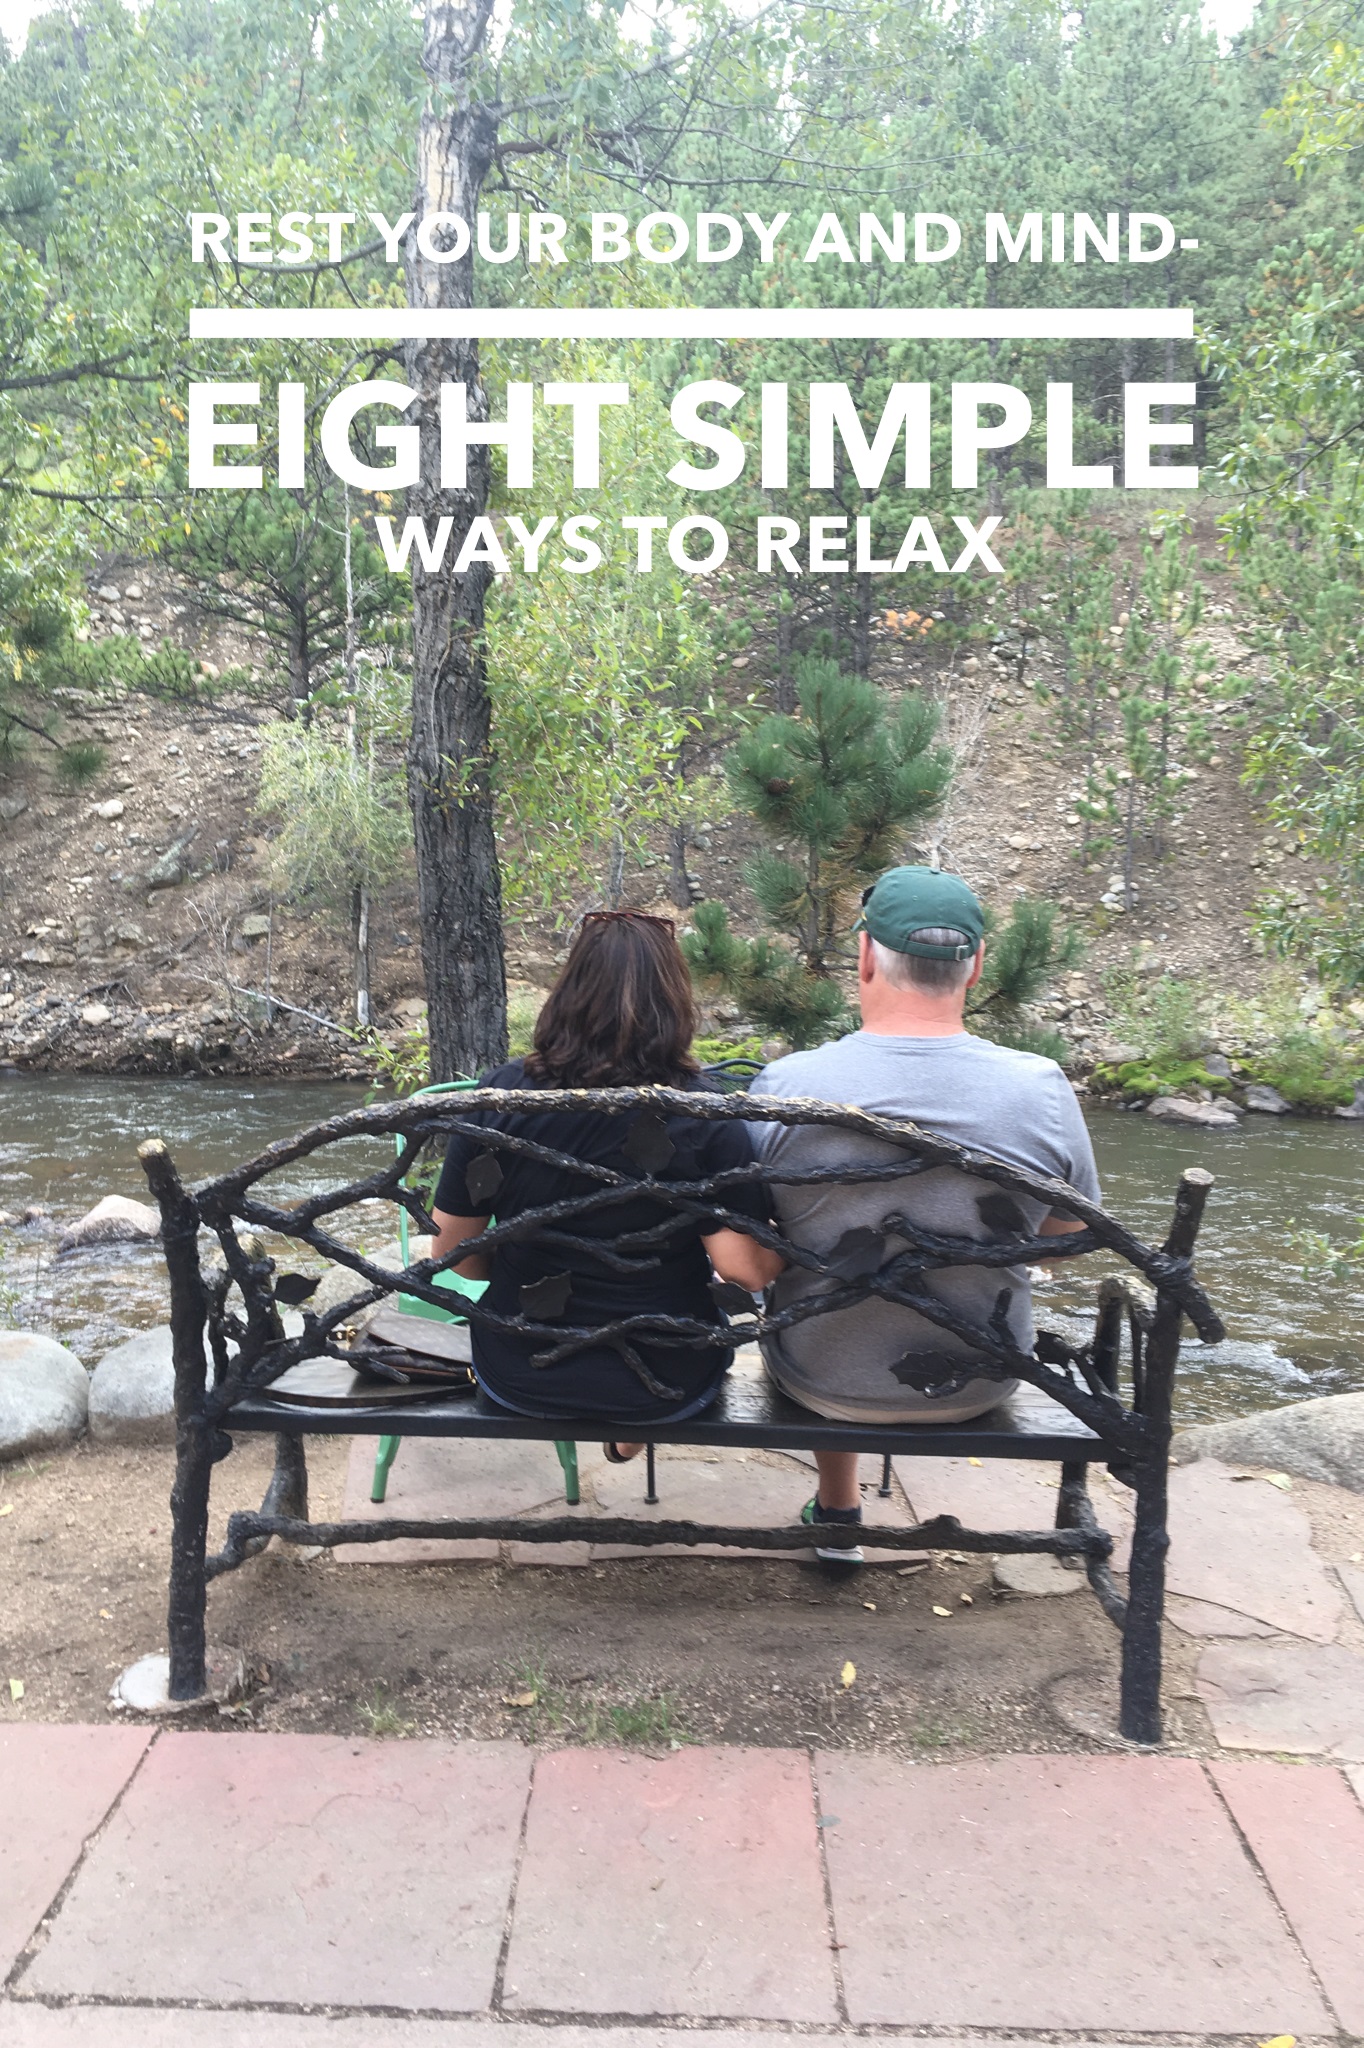 Rest Your Body and Mind-Eight Simple Ways to Relax